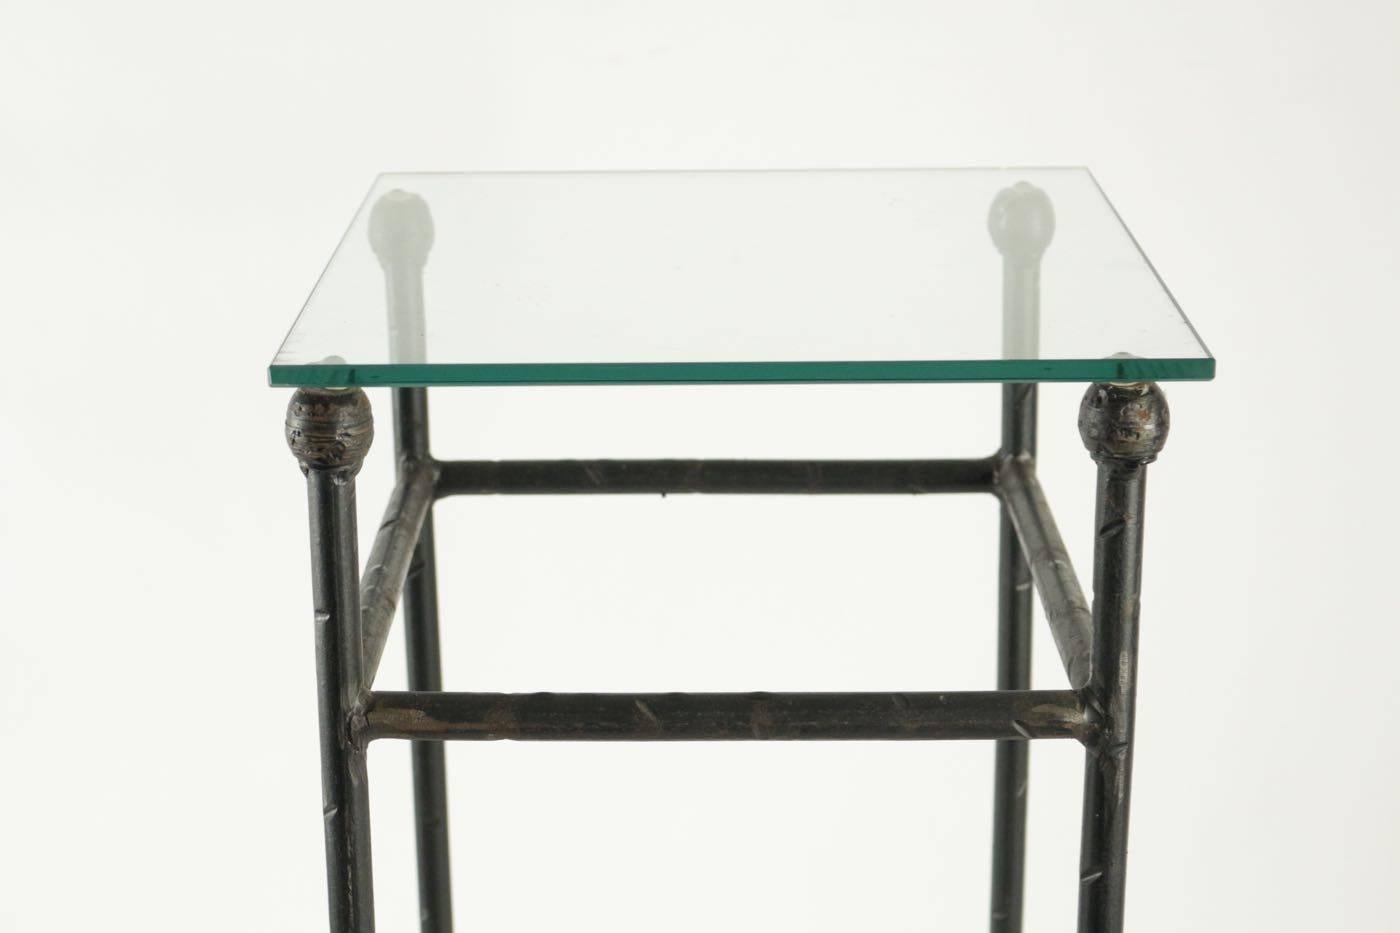 Two Consoles in Wrought Iron under Glass in an Industrial Style 20th Century For Sale 1